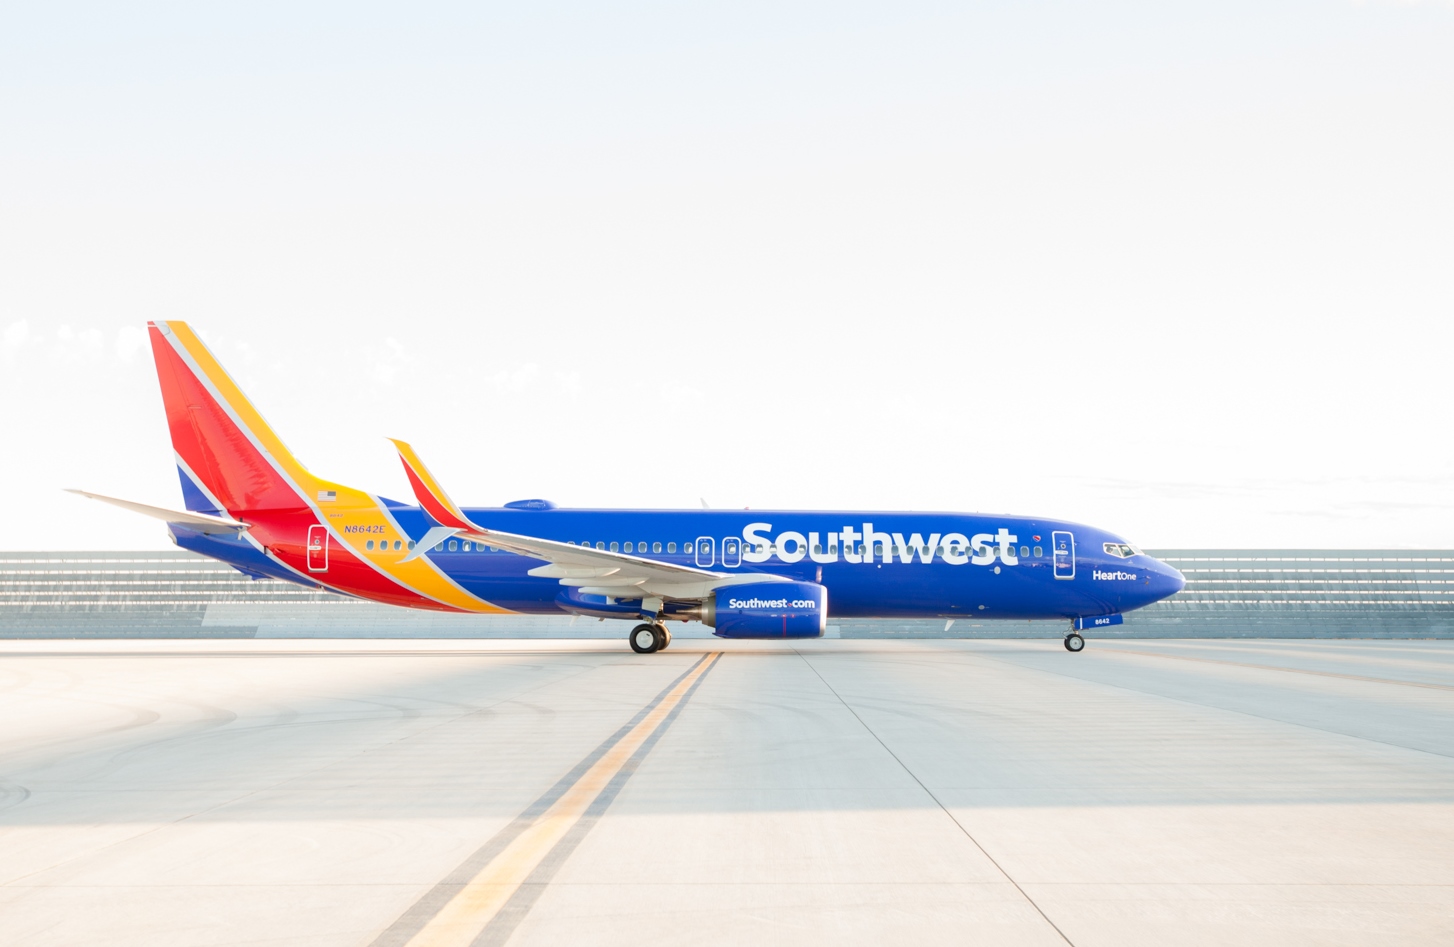 Southwest Airlines “Heart” Cabin Interior – in Virtual Reality VR 360